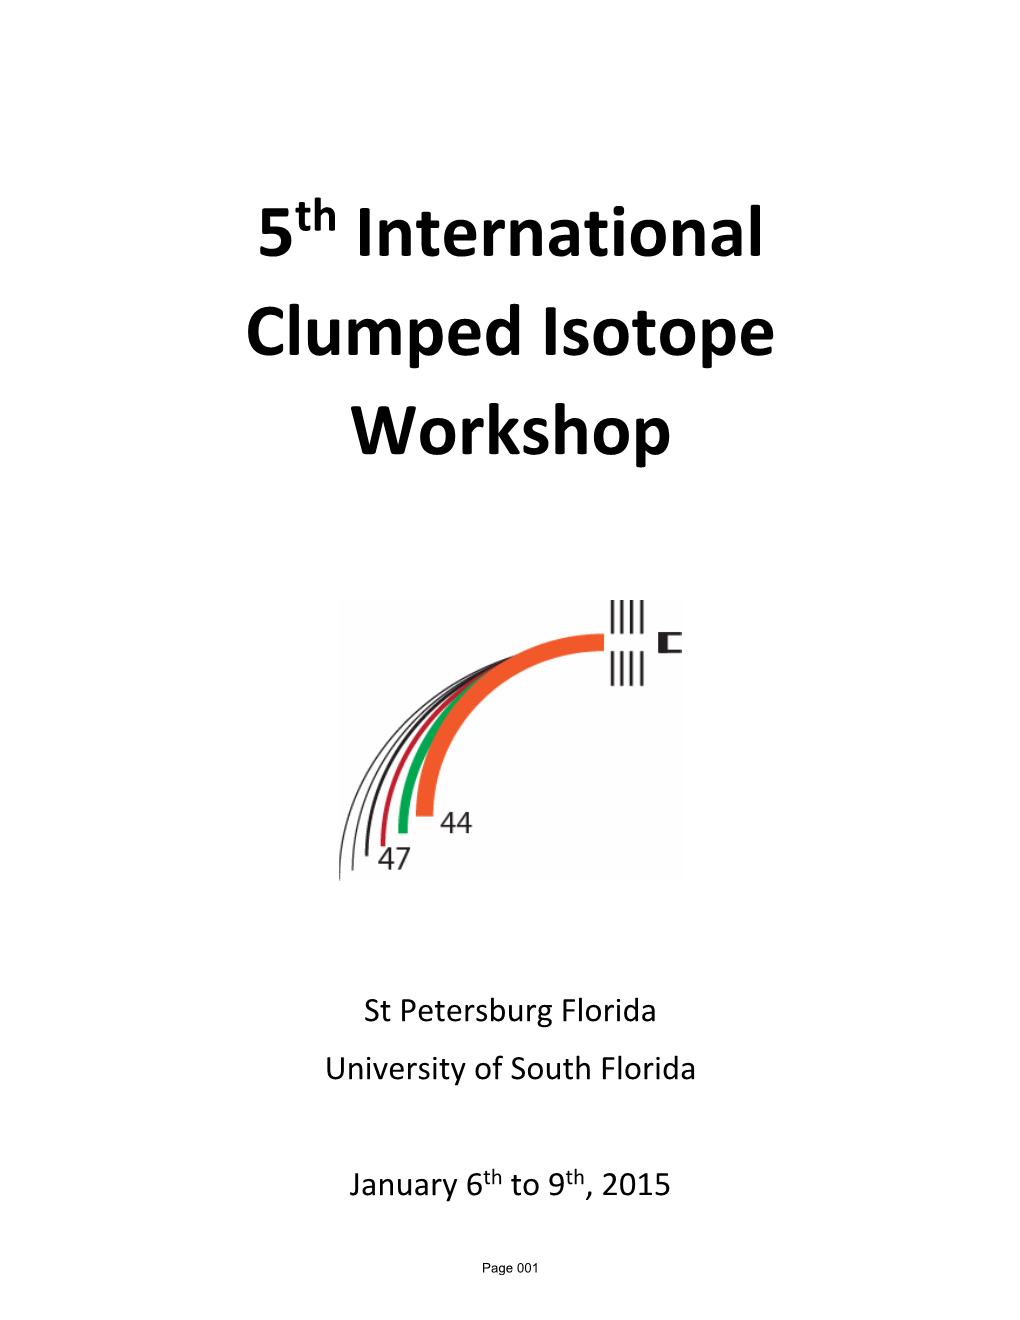 5 International Clumped Isotope Workshop